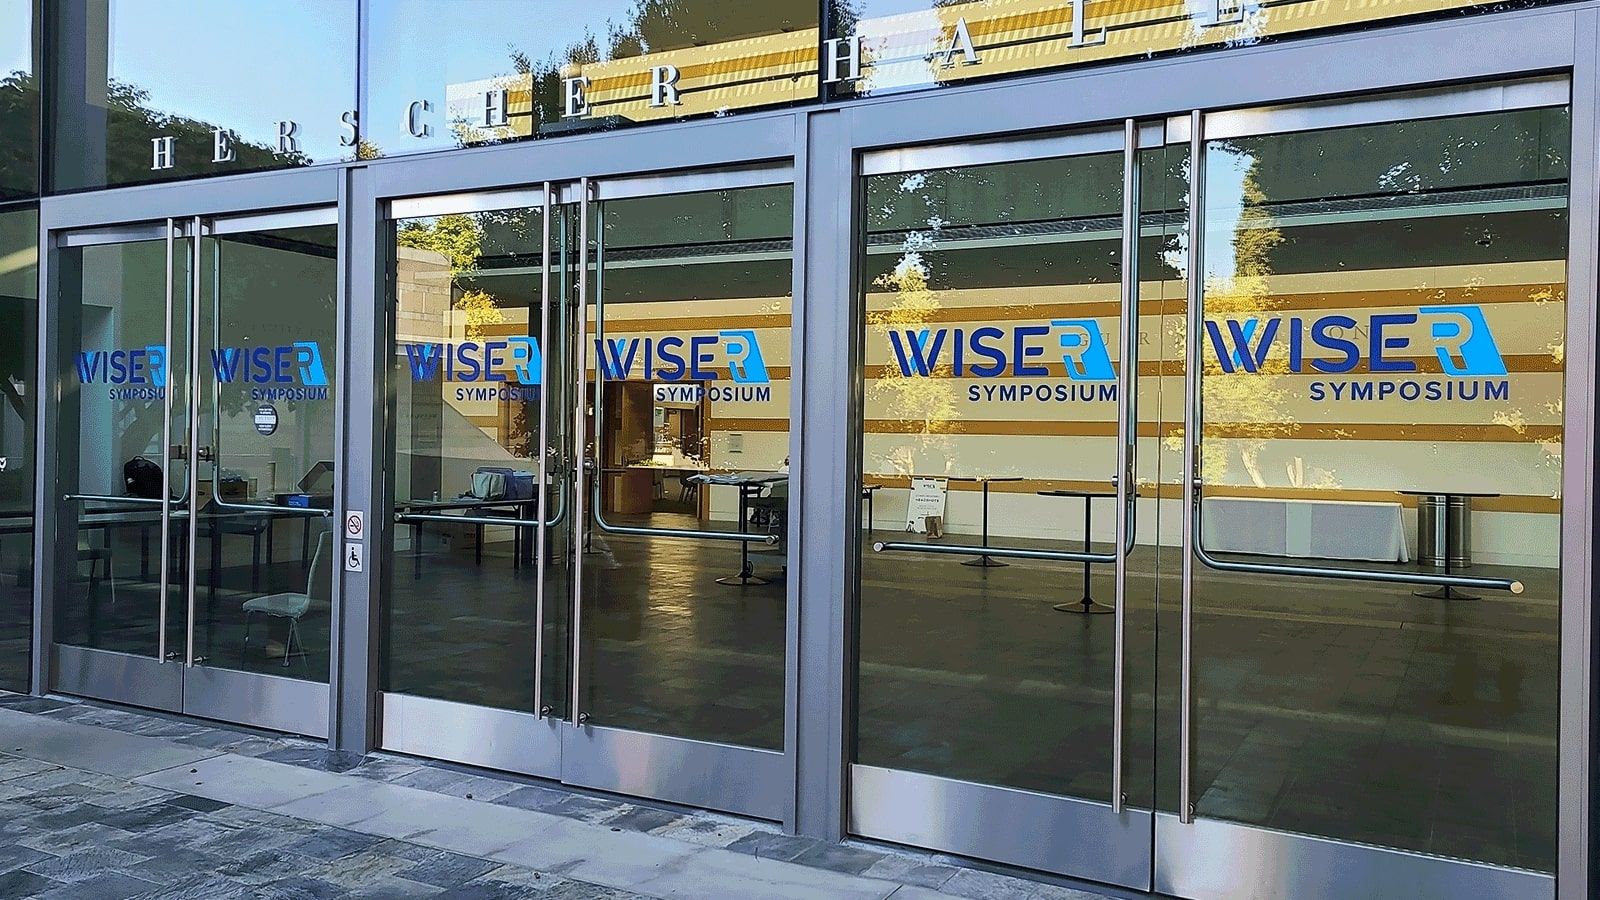 WISER Symposium vinyl lettering applied to the doors